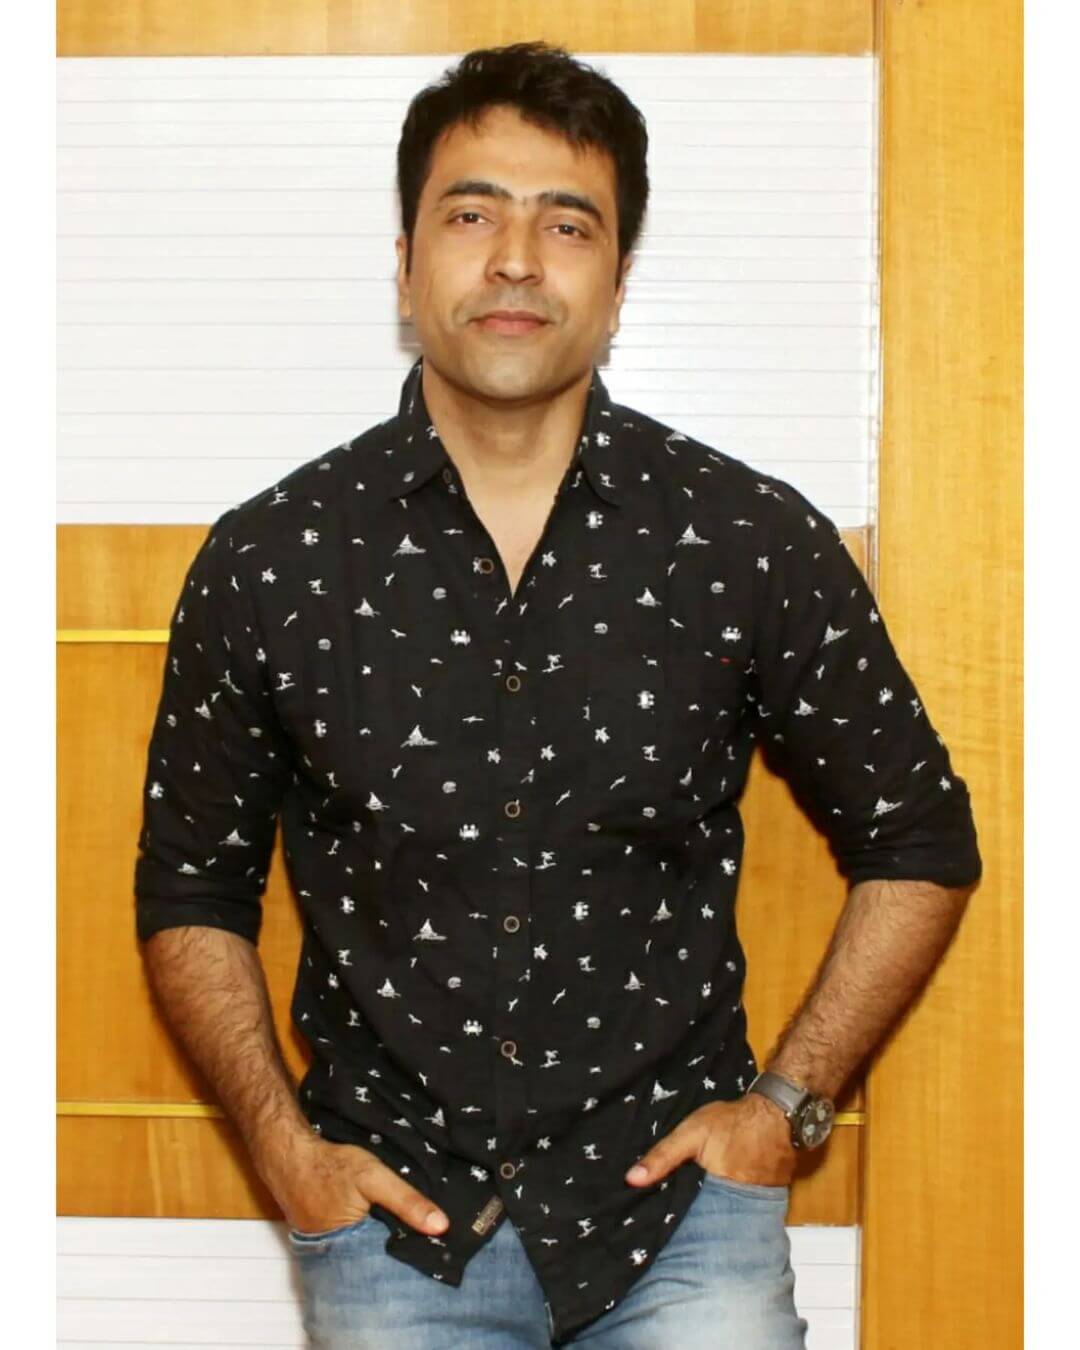 Actor Abir Chaterjee in black and white doted shirt